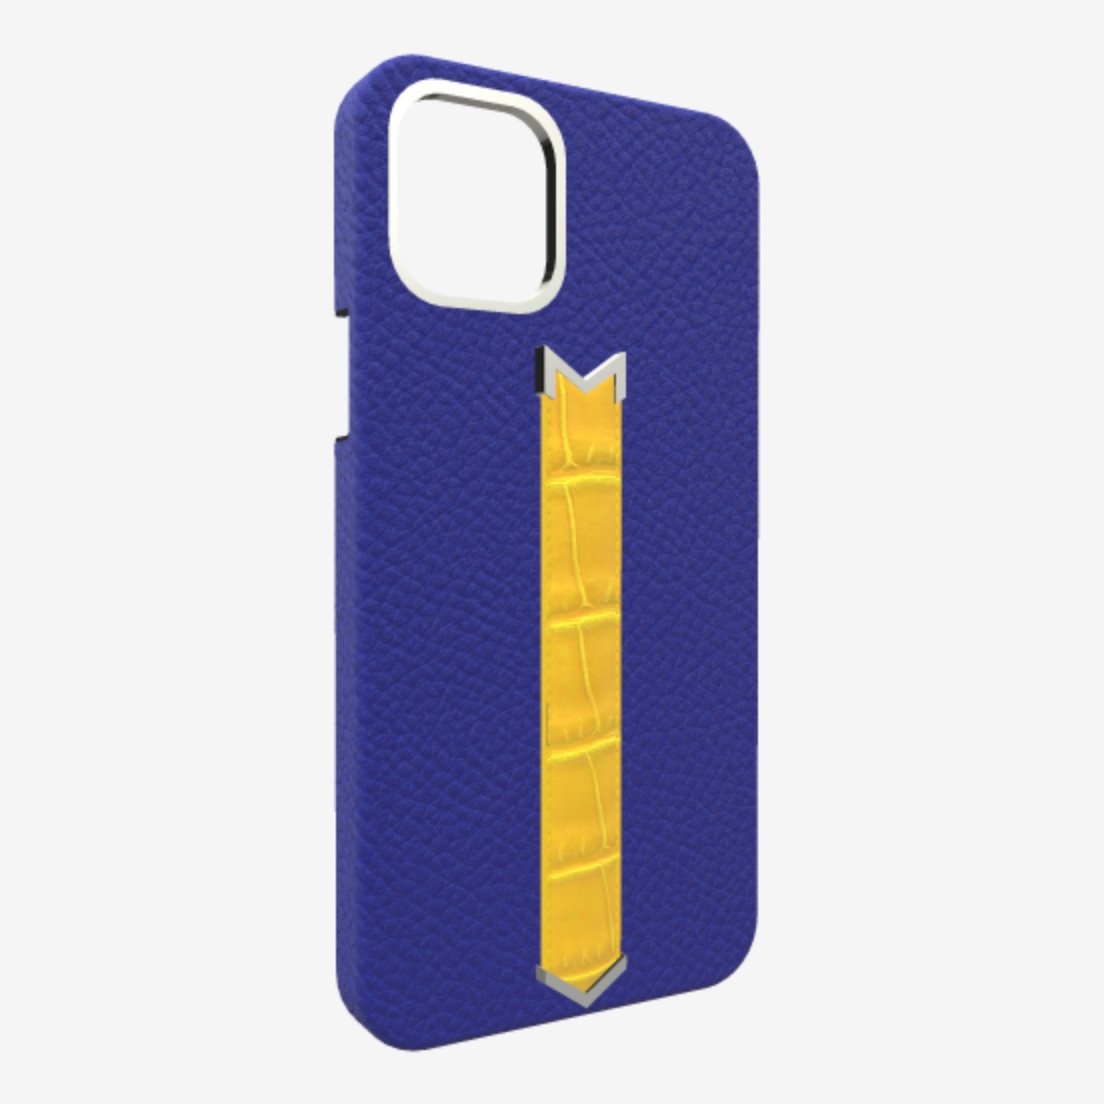 Silver Finger Strap Case for iPhone 13 Pro Max in Genuine Calfskin and Alligator Electric-Blue Summer-Yellow 